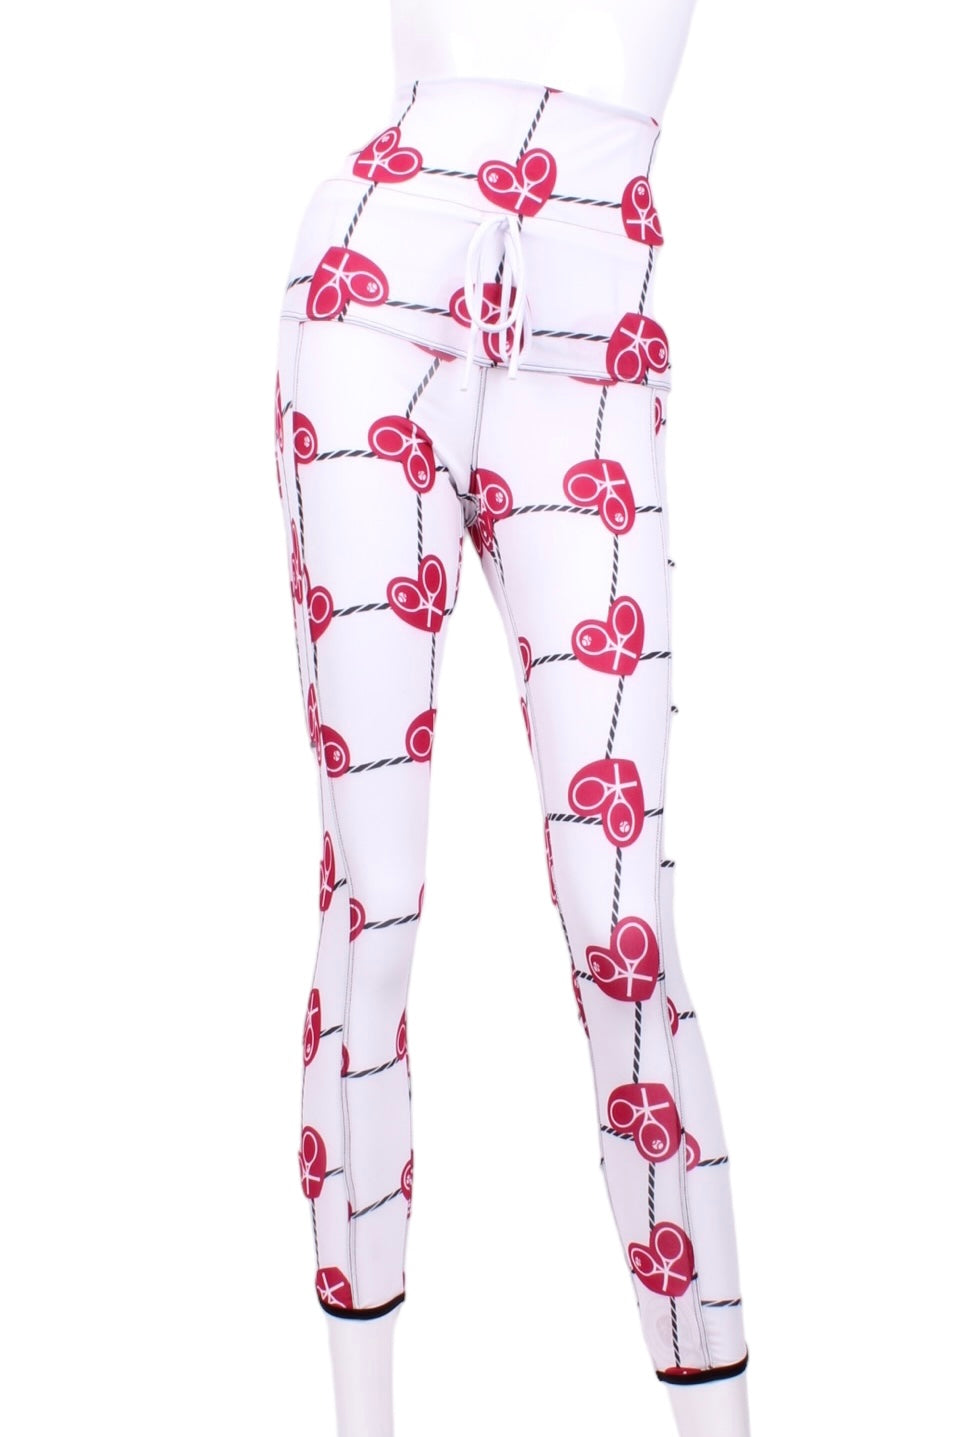 This is our limited edition roll down waist leggings in Raspberry Red Hearts & Net.  This piece has a silky soft and quick-drying with a convenient back pocket for your tennis balls.  We make these in very small quantities - by design.  Unique.  Luxurious.  Comfortable.  Cool.  Fun.